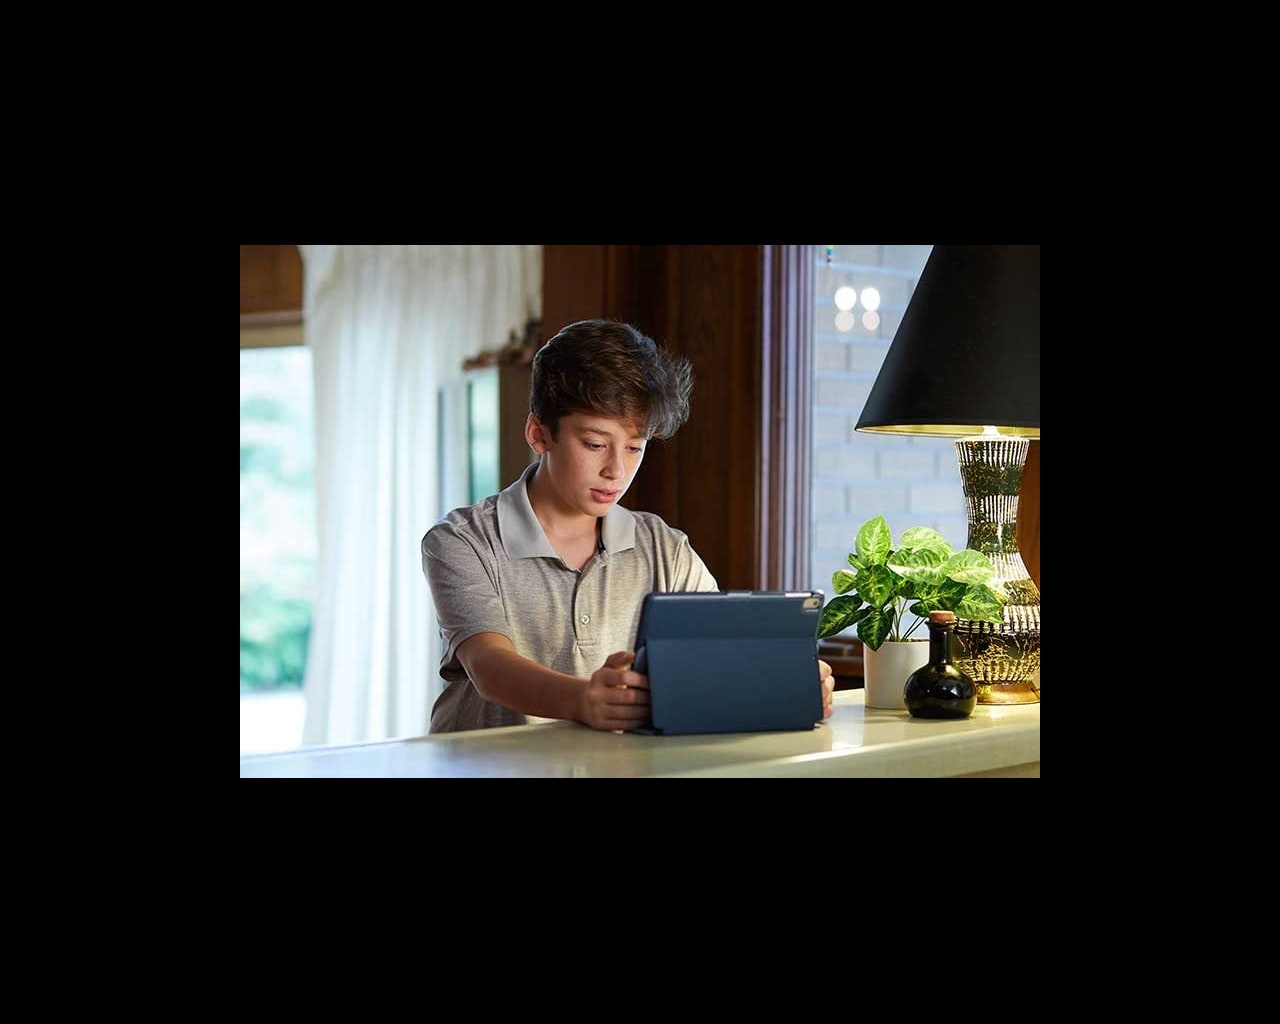 Child looking upset at computer